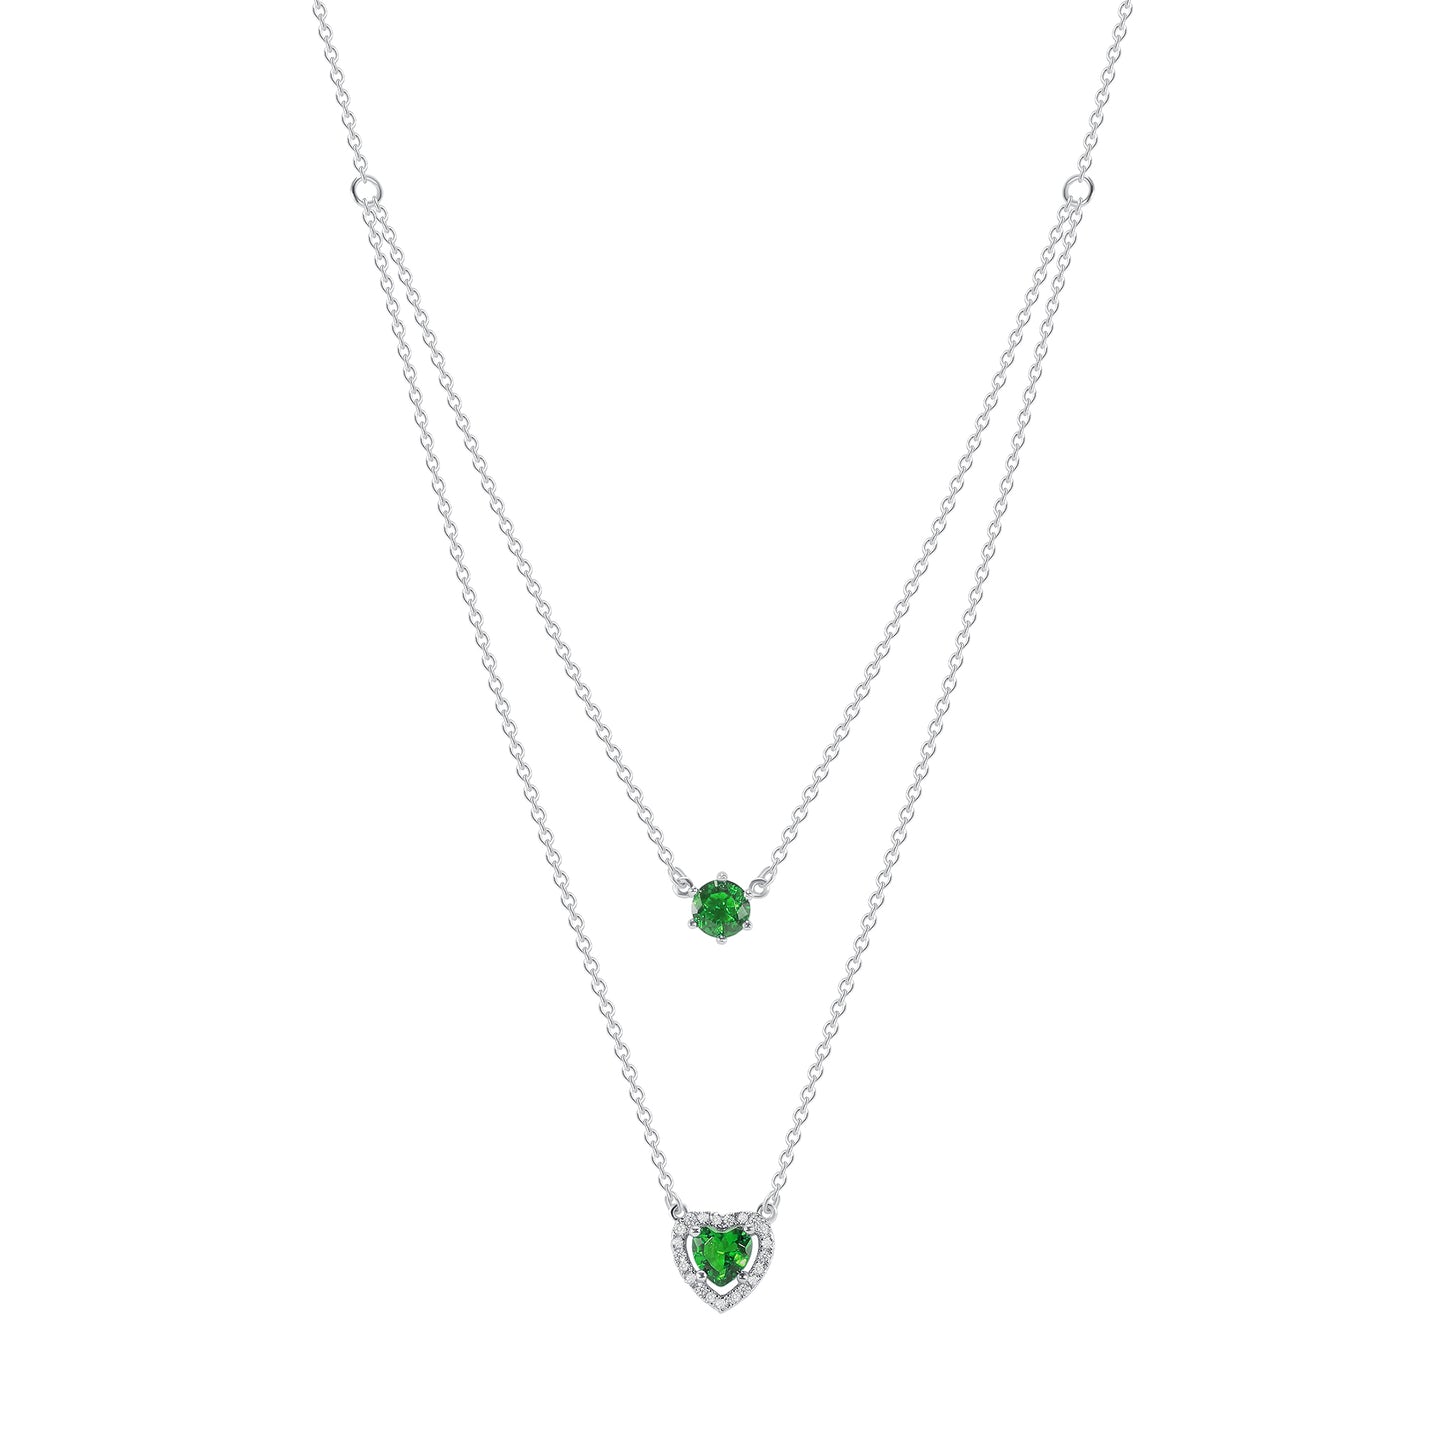 Silver 925 Rhodium Plated Cubic Zirconia Green Emerald Double Row Necklace. BN3357GRN